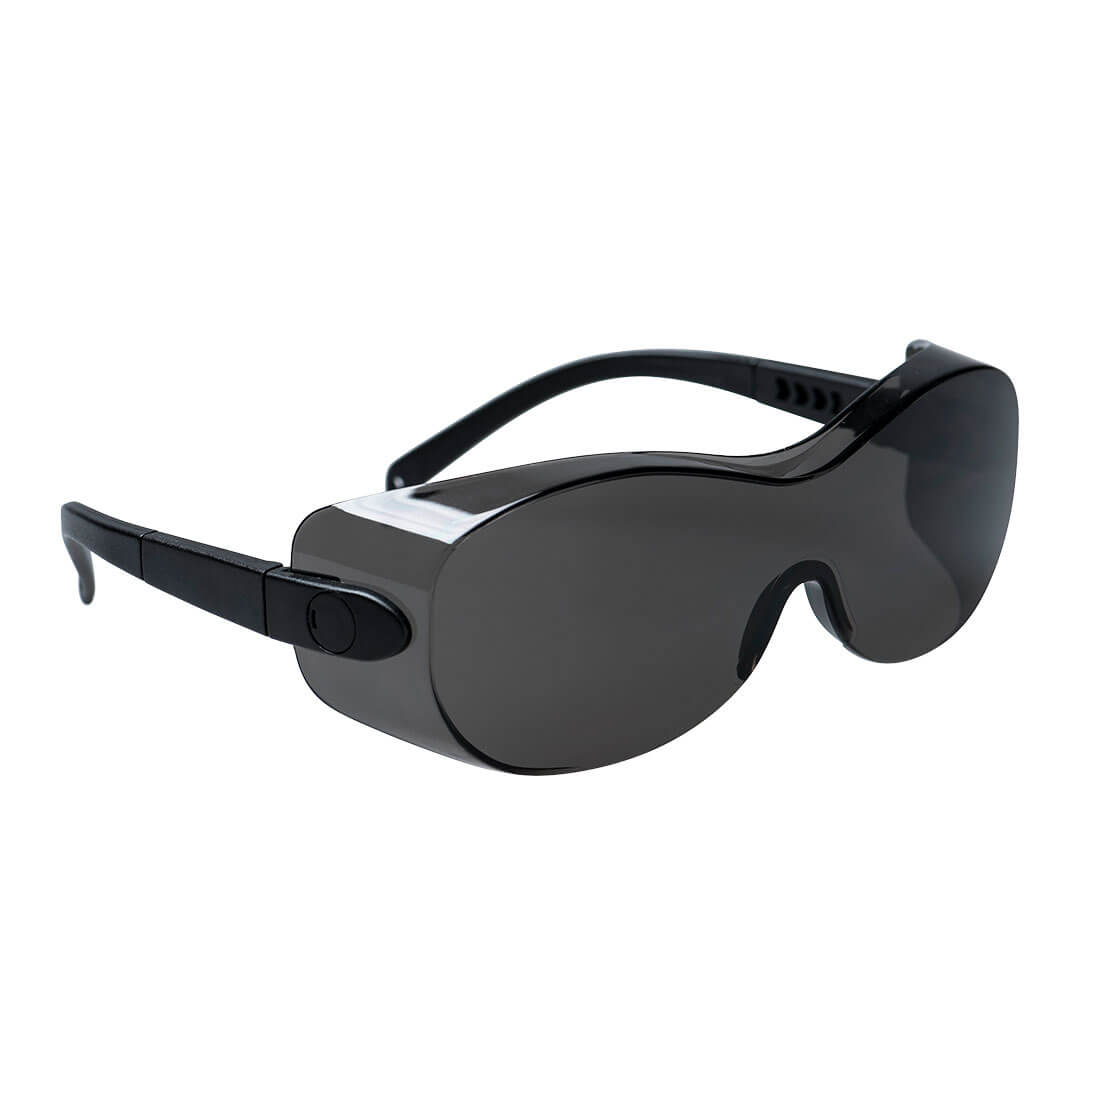 PS30 Over Spectacle Safety Anti Scratch UV + Eye protection Eyewear Glasses - Hamtons Direct